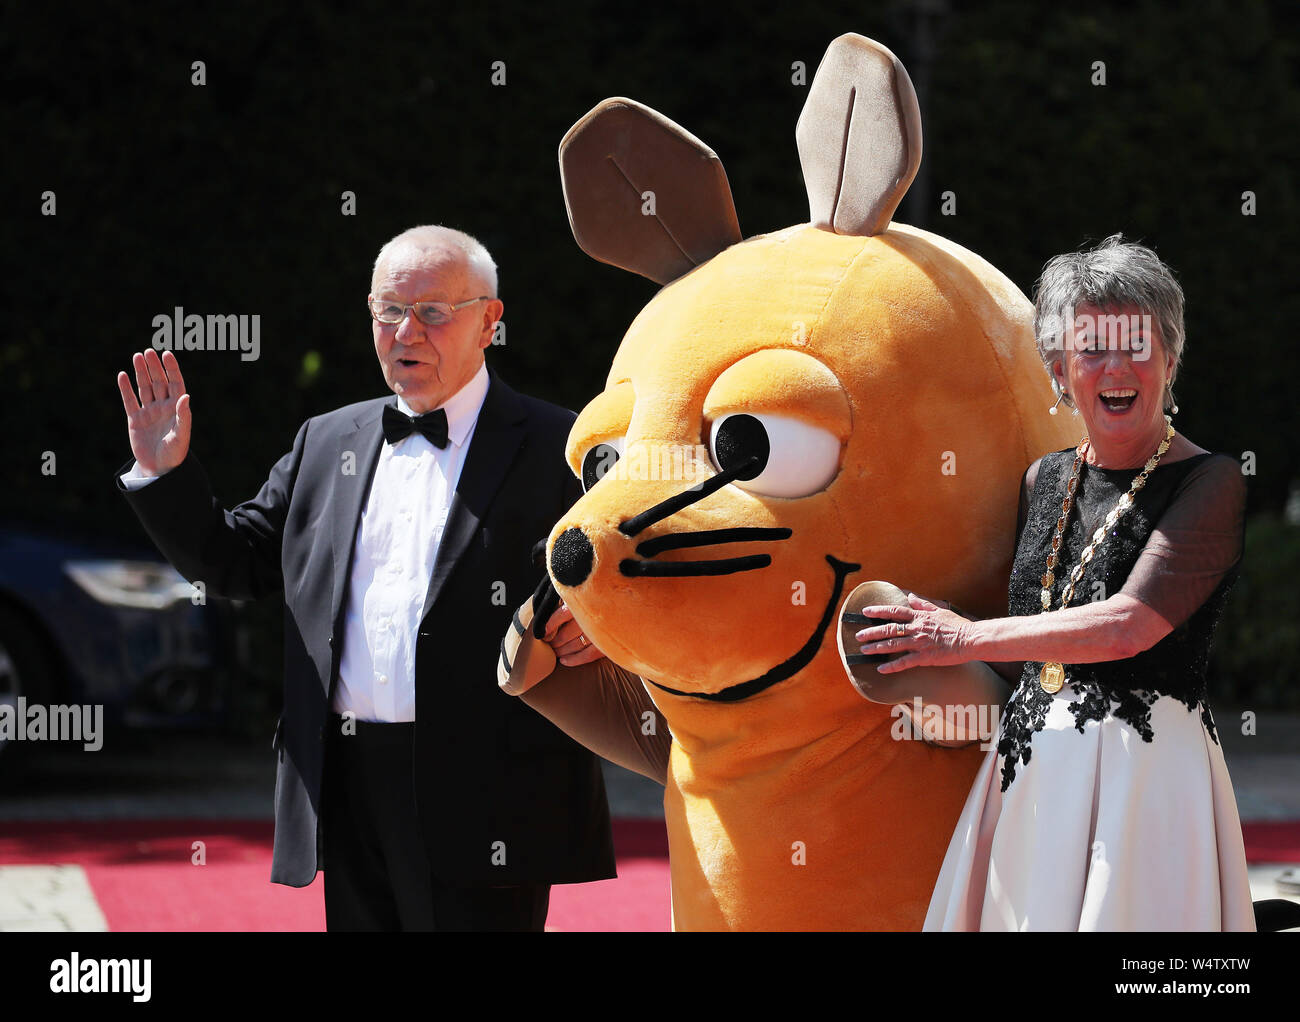 Bayreuth, Germany. 25th July, 2019. Armin Maiwald and the mouse from 'Die Sendung mit der Maus' arrive at the beginning of the Bayreuth Festival 2019 and are welcomed by the Lord Mayor of Bayreuth, Brigitte Merk-Erbe. The Richard Wagner Festival begins on Thursday. Numerous celebrities are expected on the red carpet. (To dpa 'Bayreuth Festival start in heat with new 'Tannhäuser'') Credit: Daniel Karmann/dpa/Alamy Live News Stock Photo